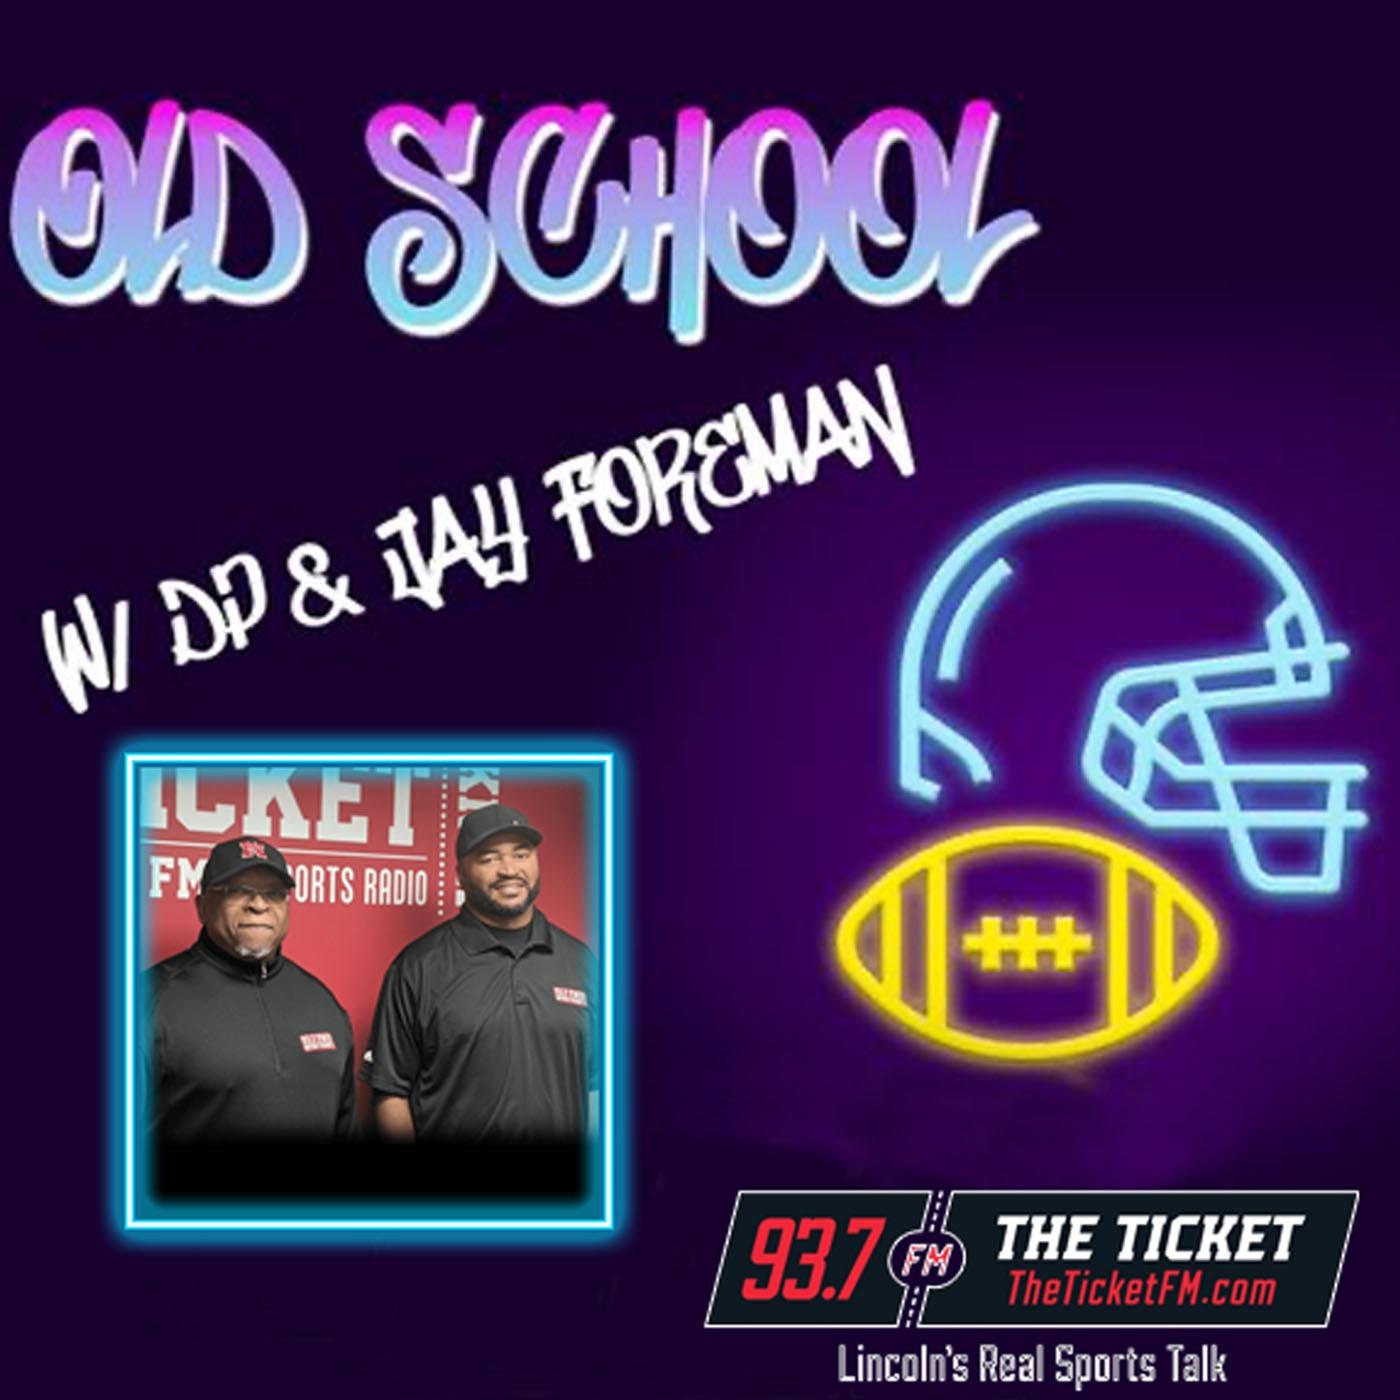 Old School w/ DP and Jay – 93.7 The Ticket KNTK